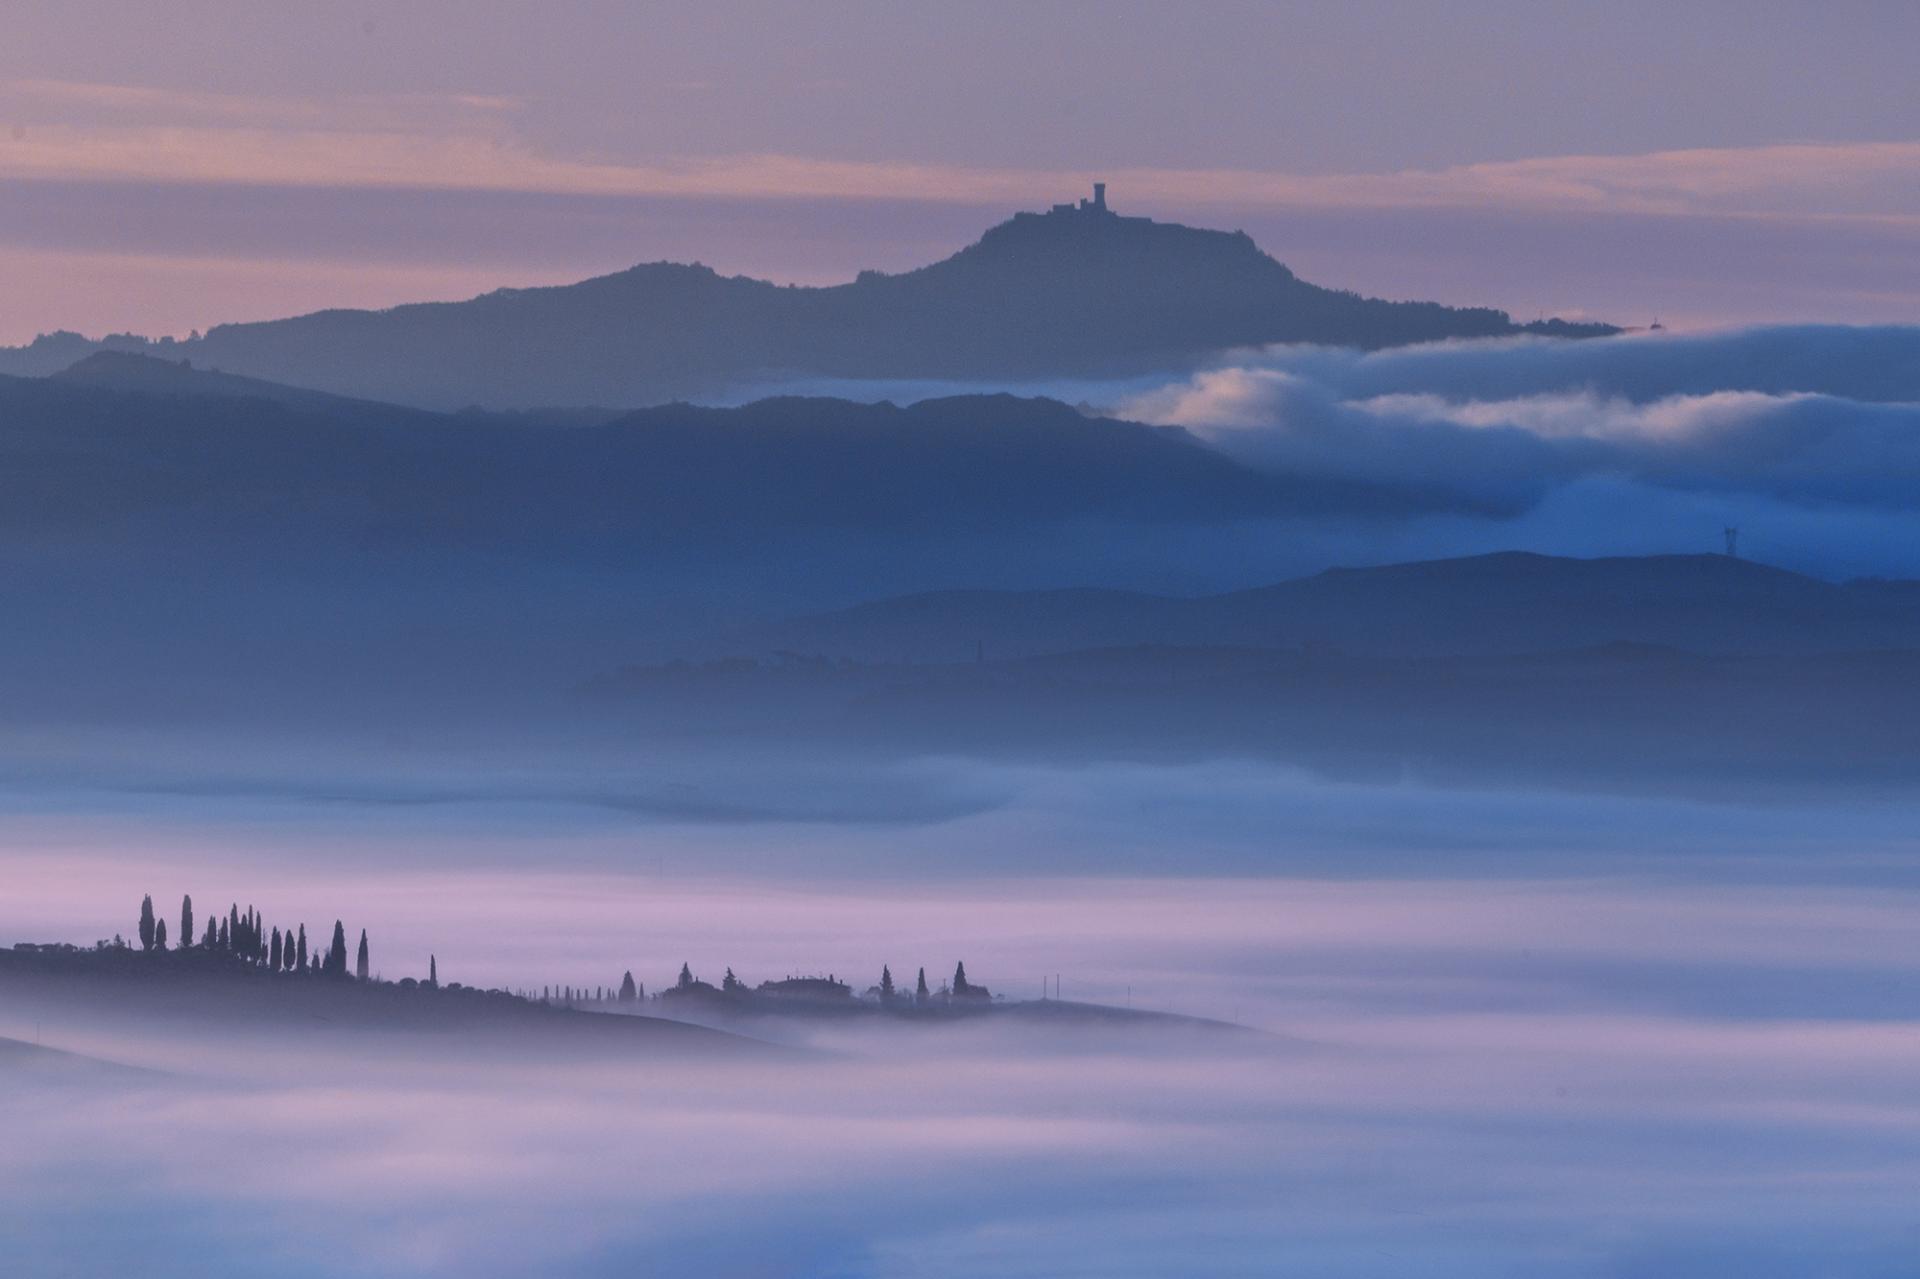 London Photography Awards Winner - Sea of Dreams in Val d'Orcia